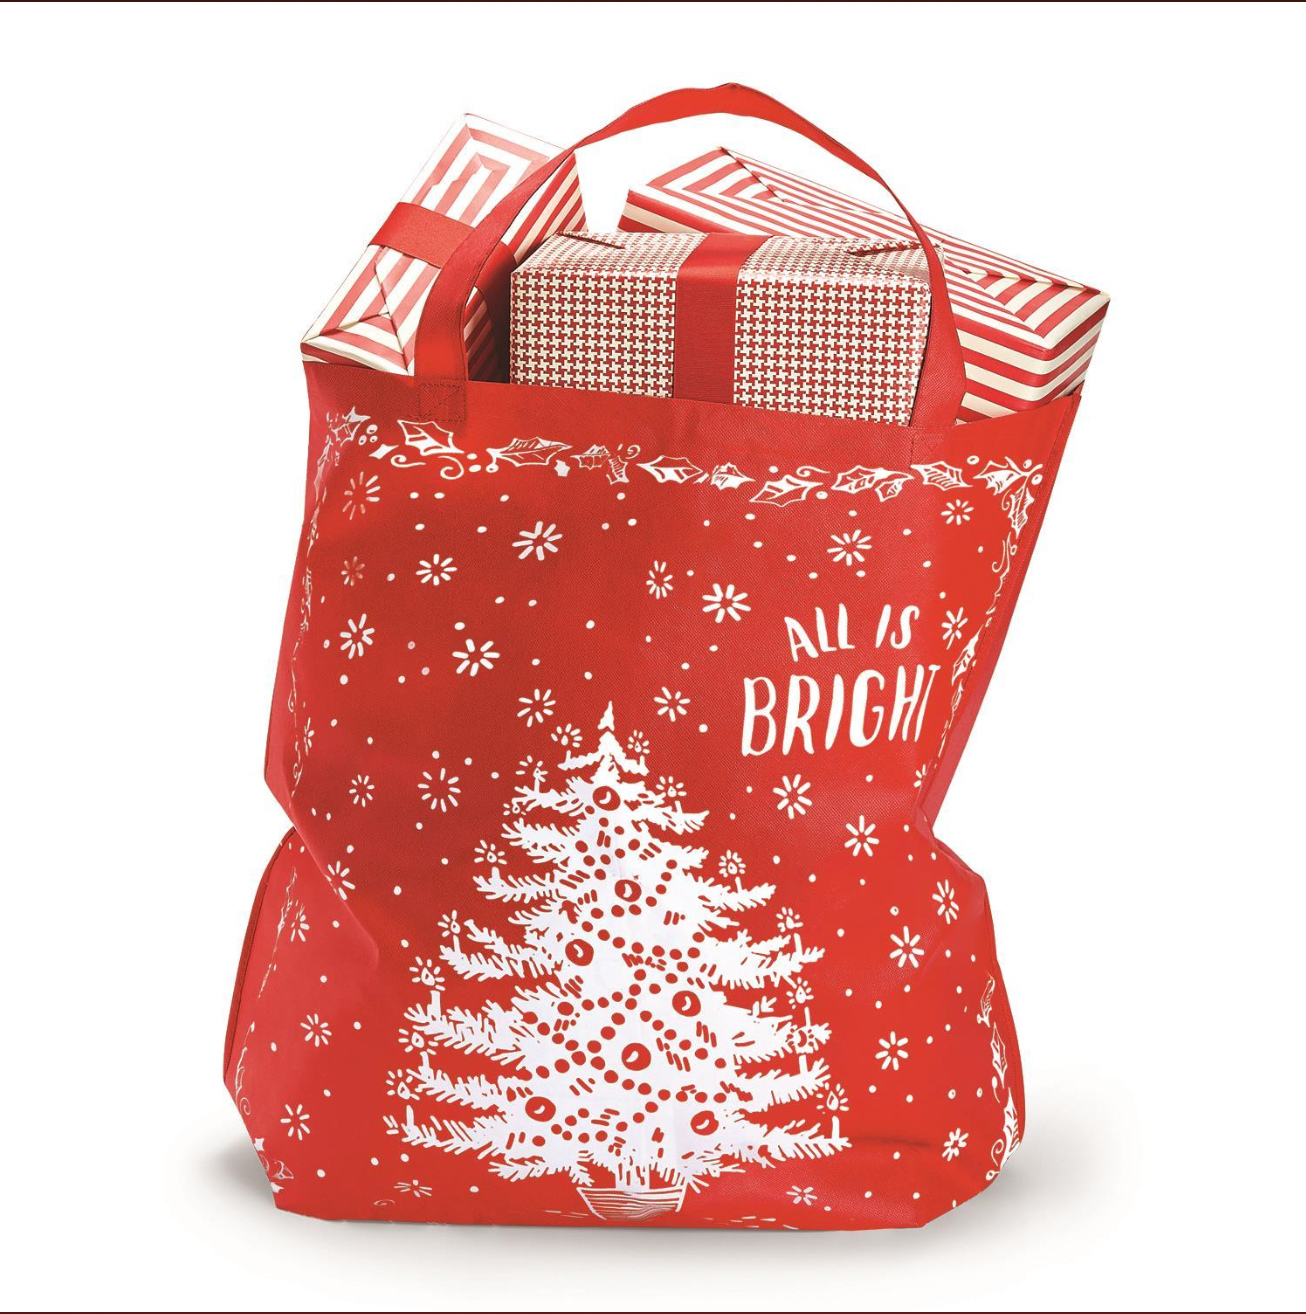 "All is Bright" Oversized Christmas Tote